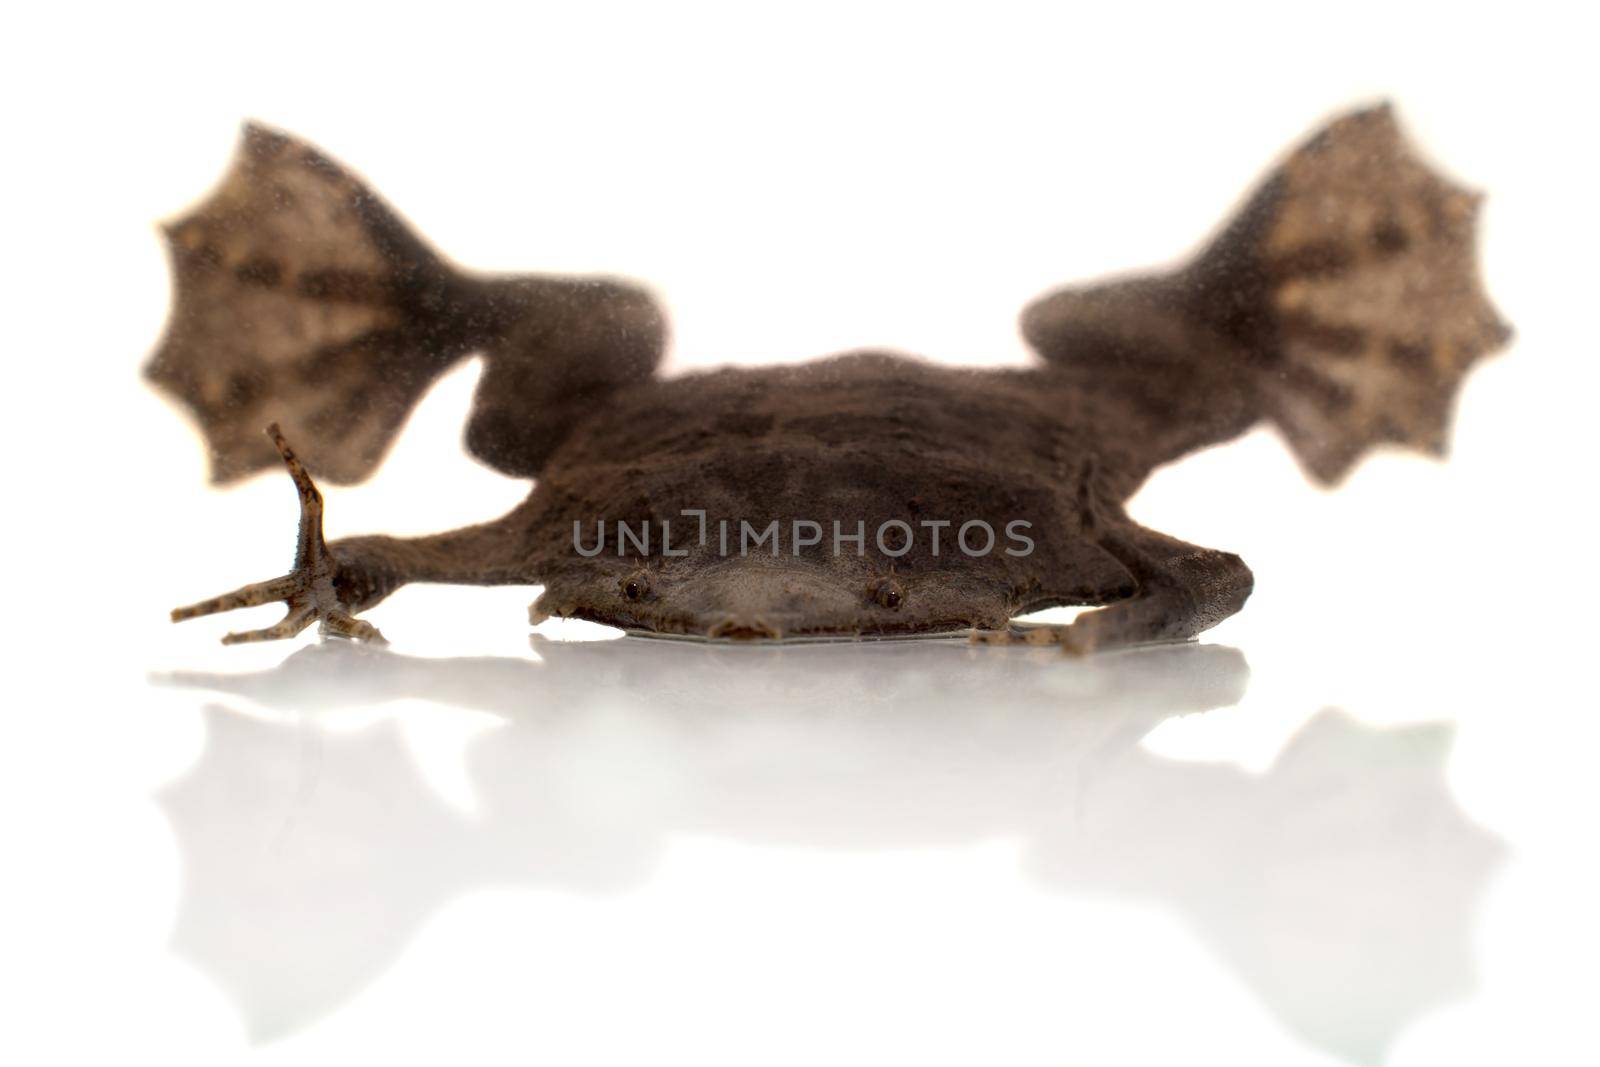 A Surinam toad, Pipa pipa, isolated on white background